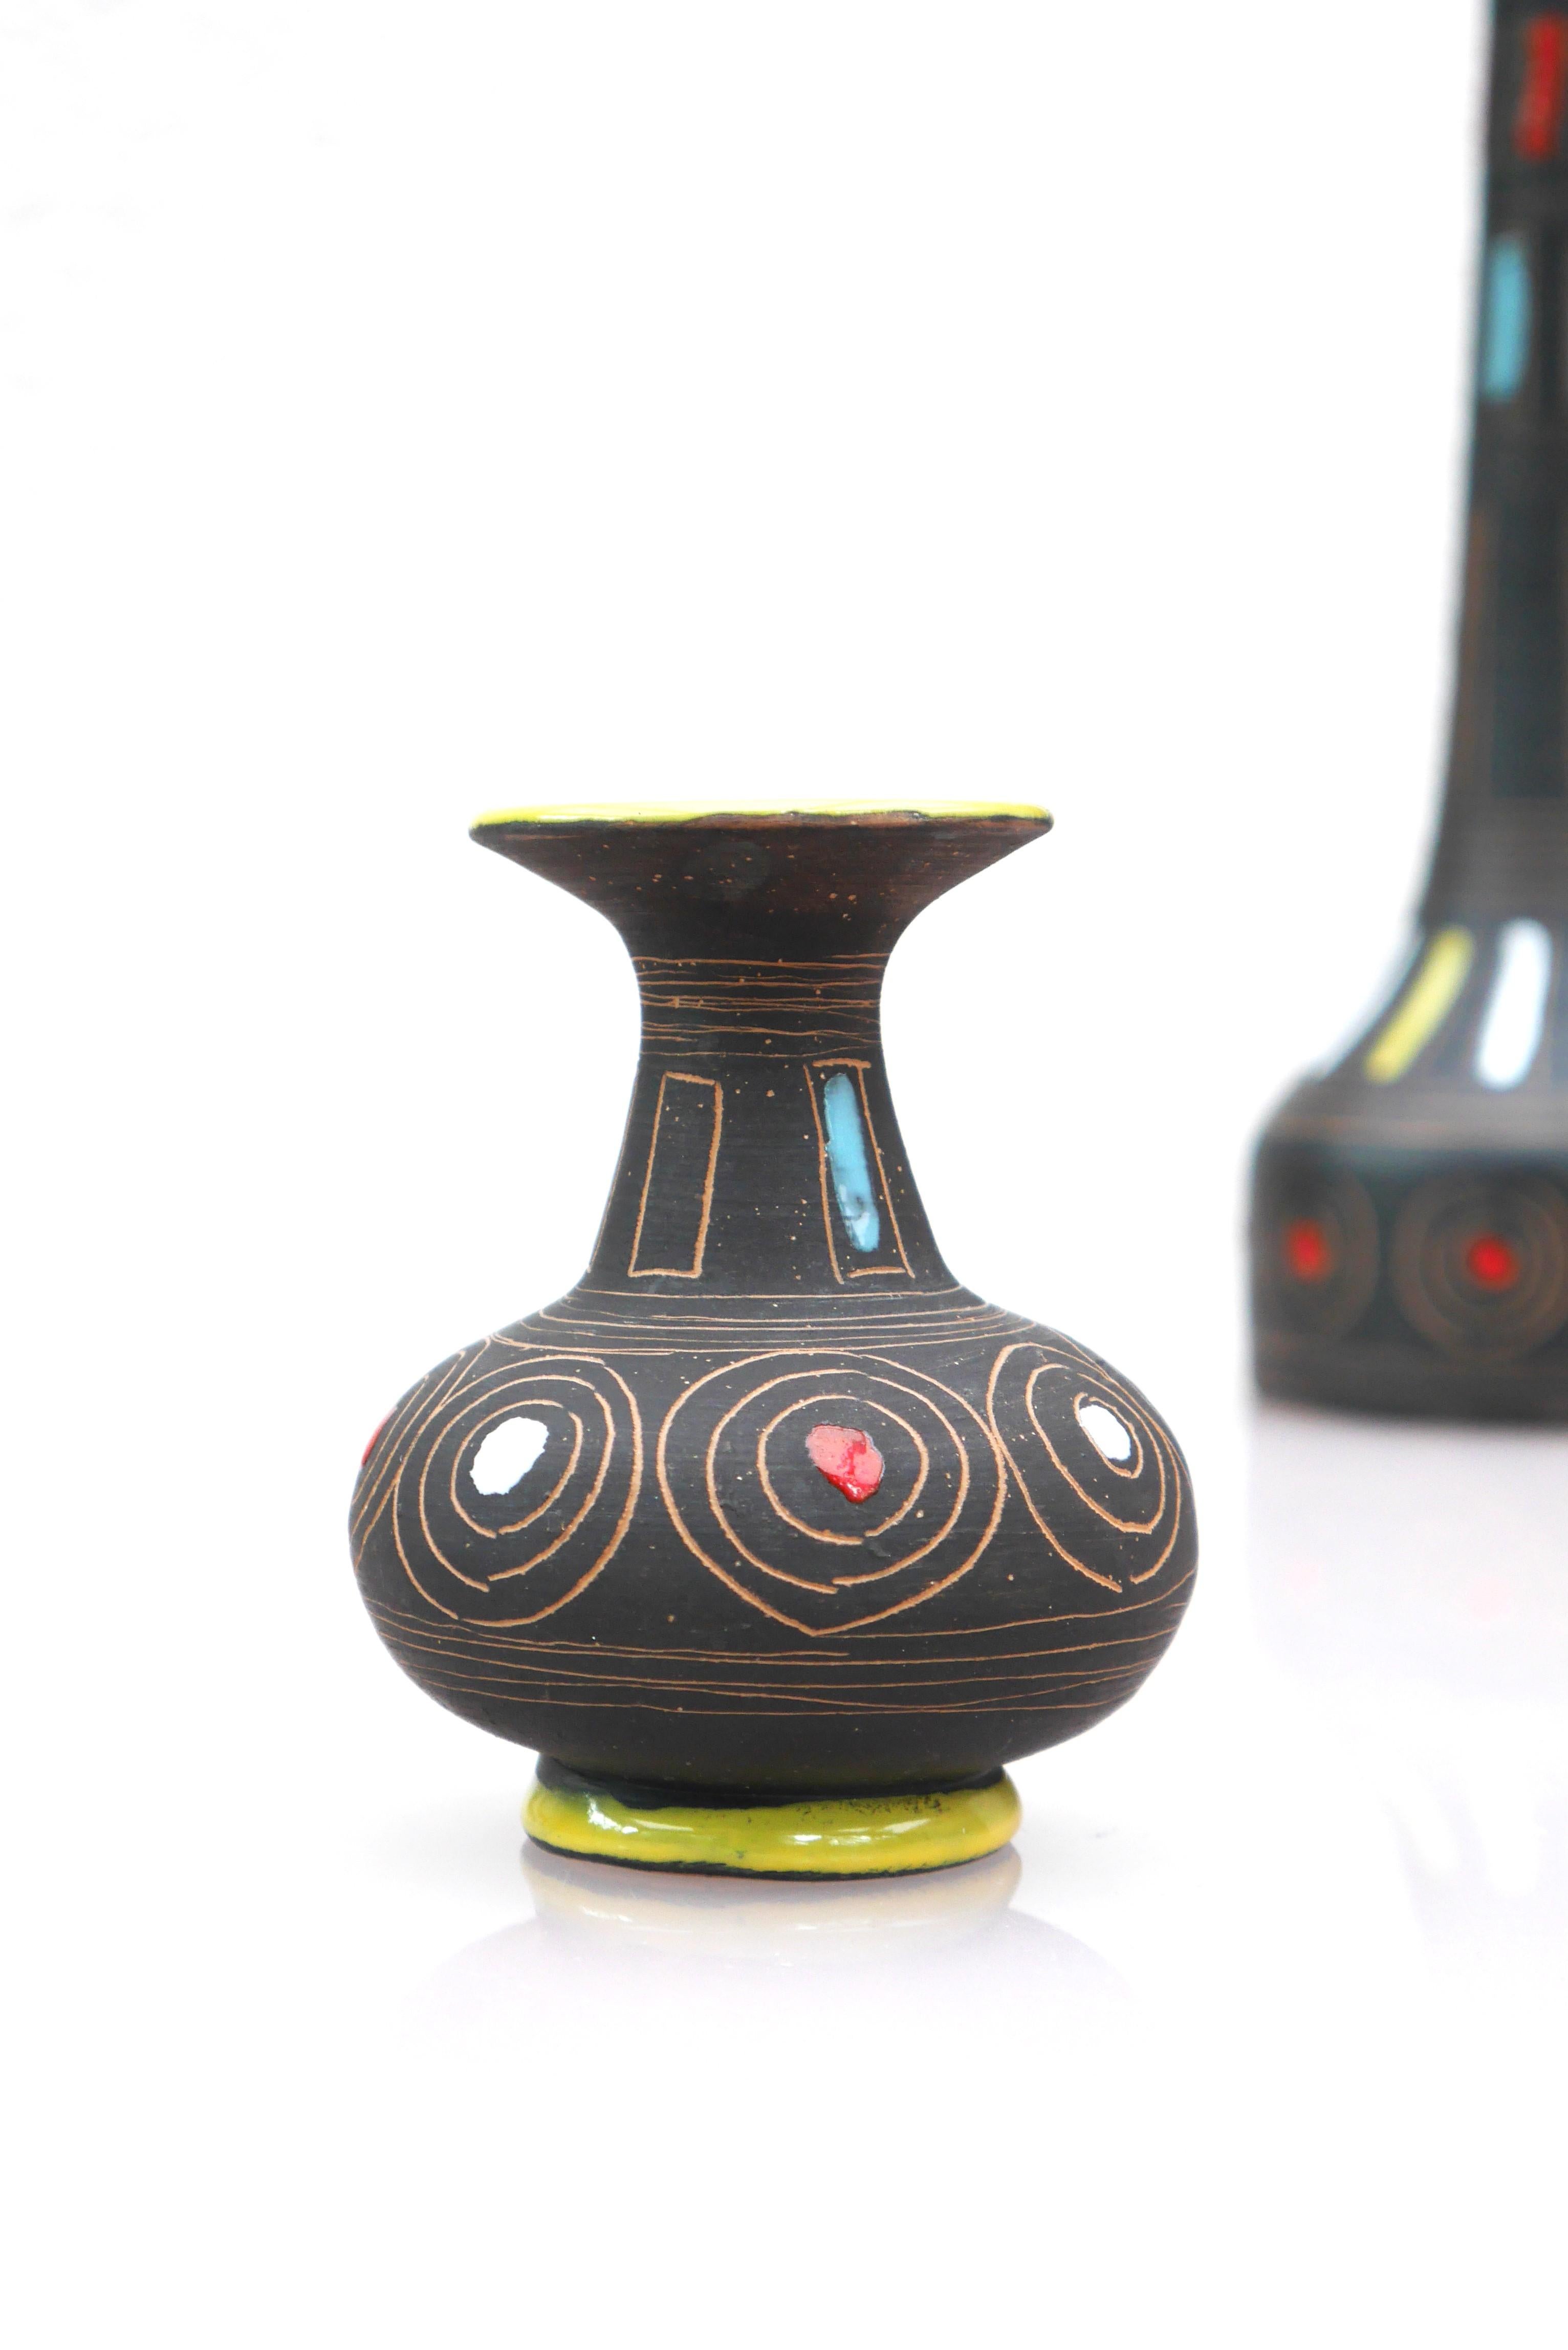 Italian A pair of Mid-century modern pottery vases, by Fratelli Fanciullacci , Italy.